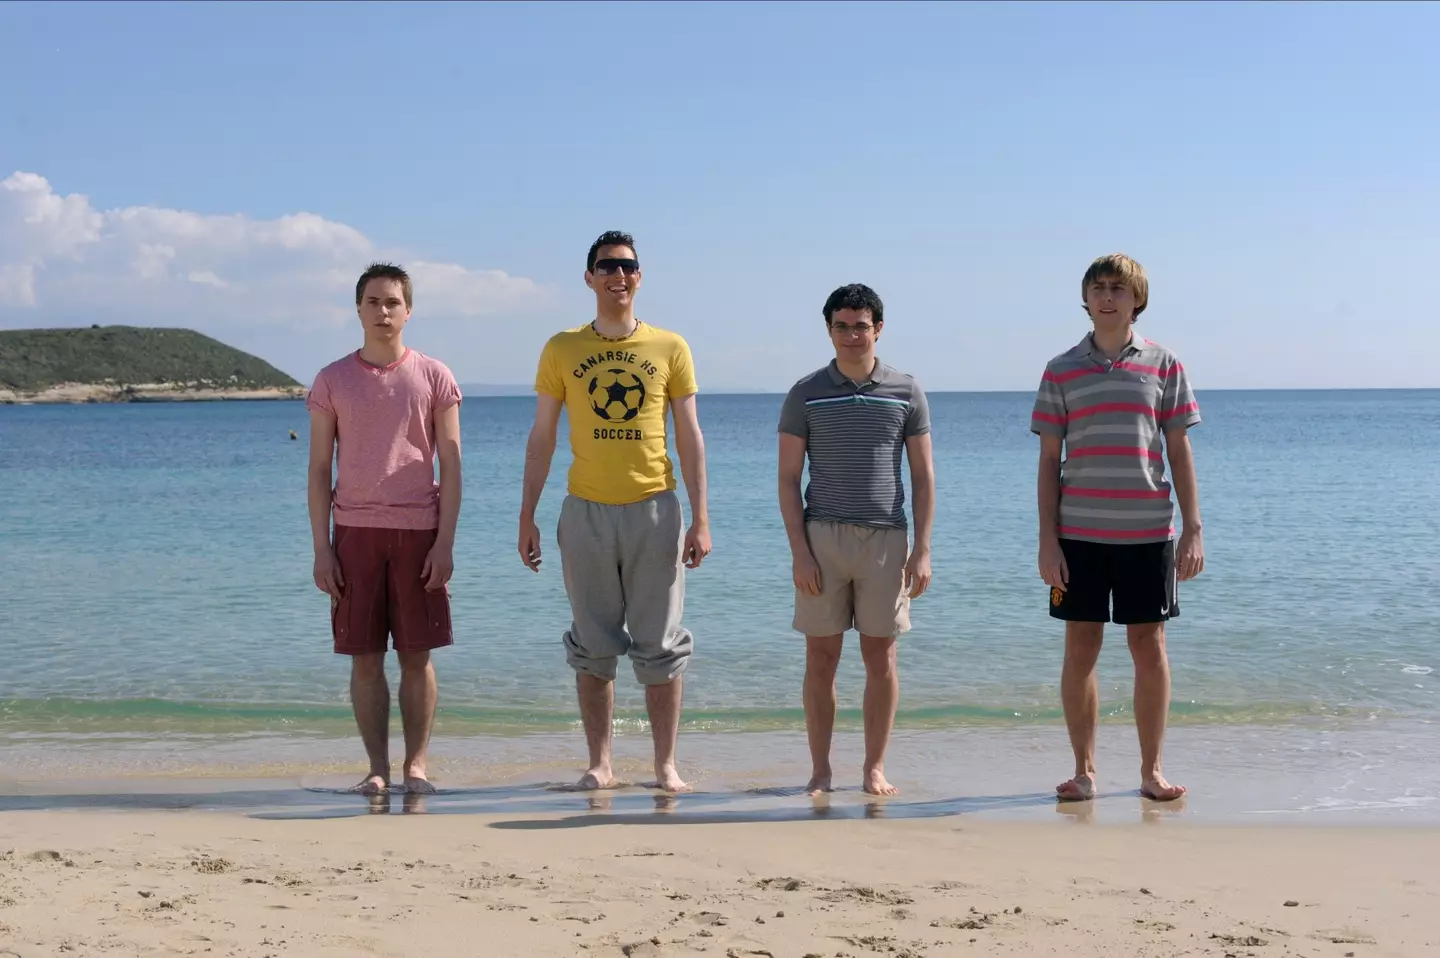 With three series and two movies under their belt, The Inbetweeners have cemented their place in comedy history.